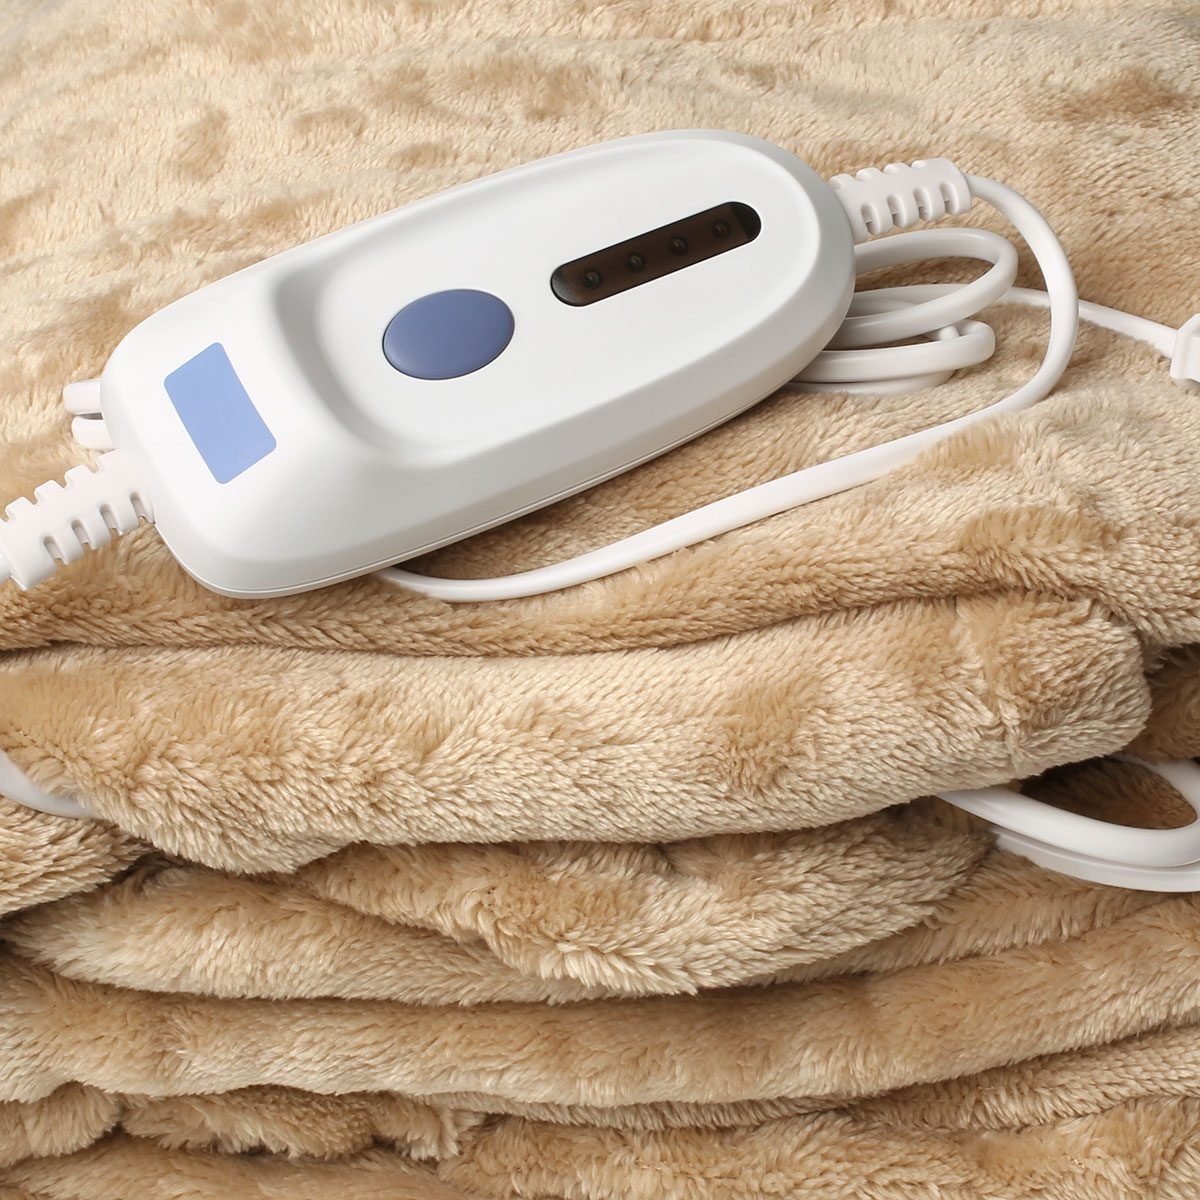 Are Electric Heated Blankets Safe?